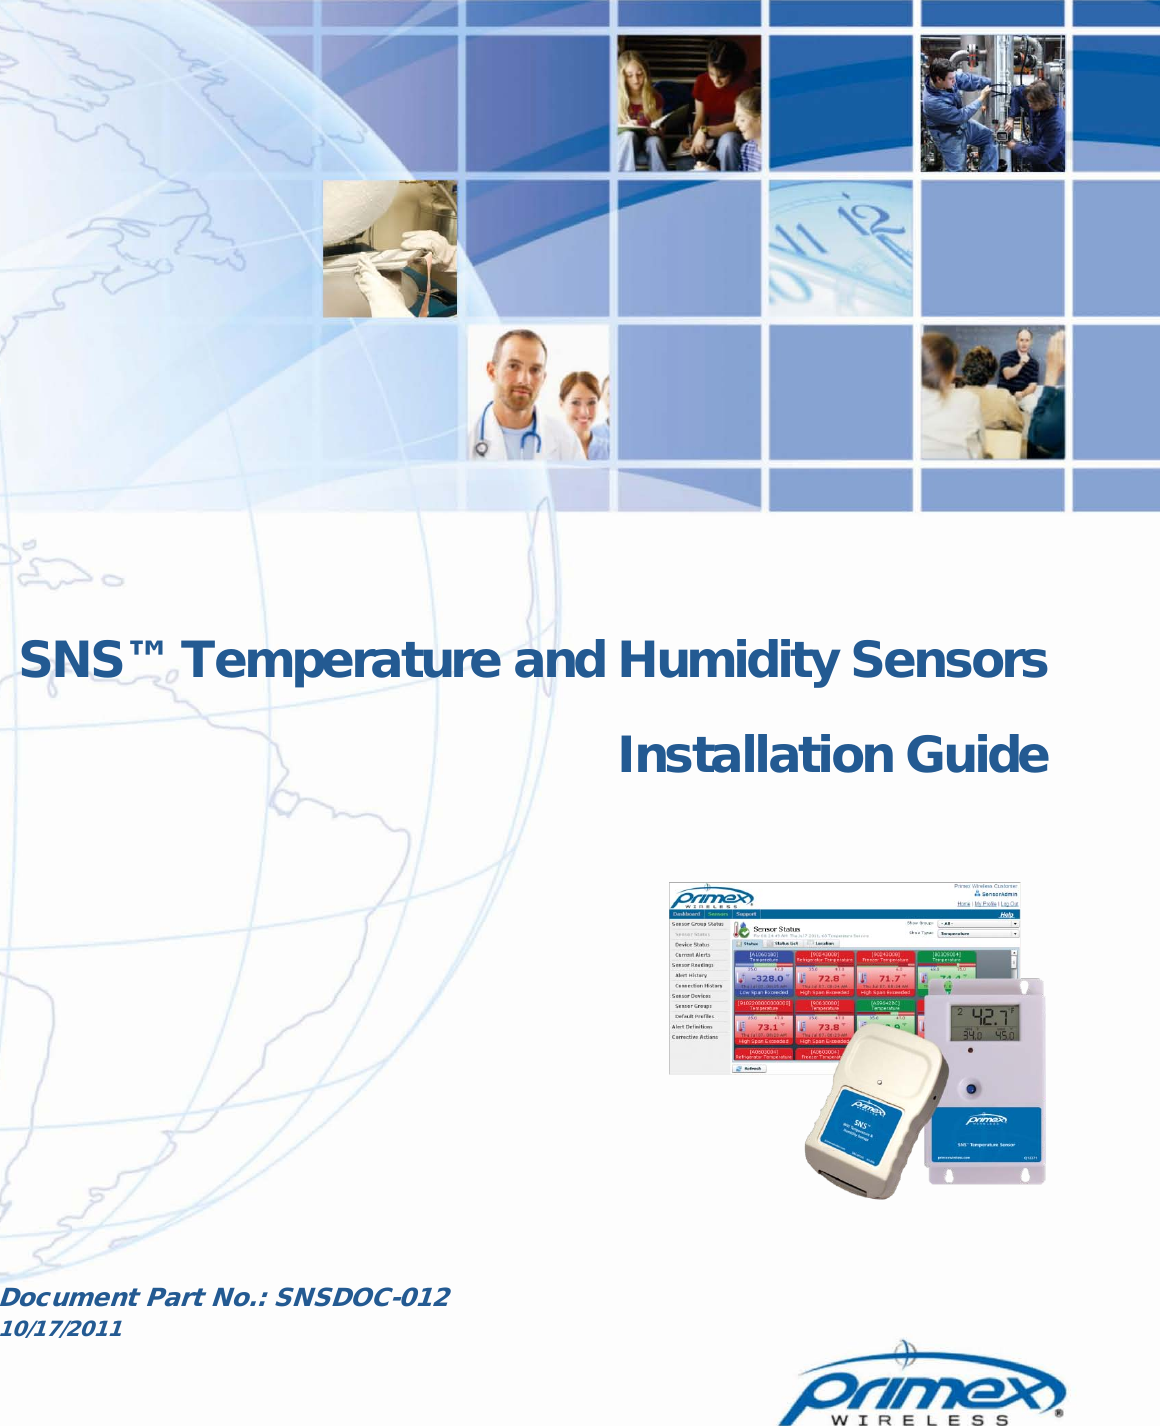  SNS™ Temperature and Humidity Sensors Installation Guide  Document Part No.: SNSDOC-012  10/17/2011